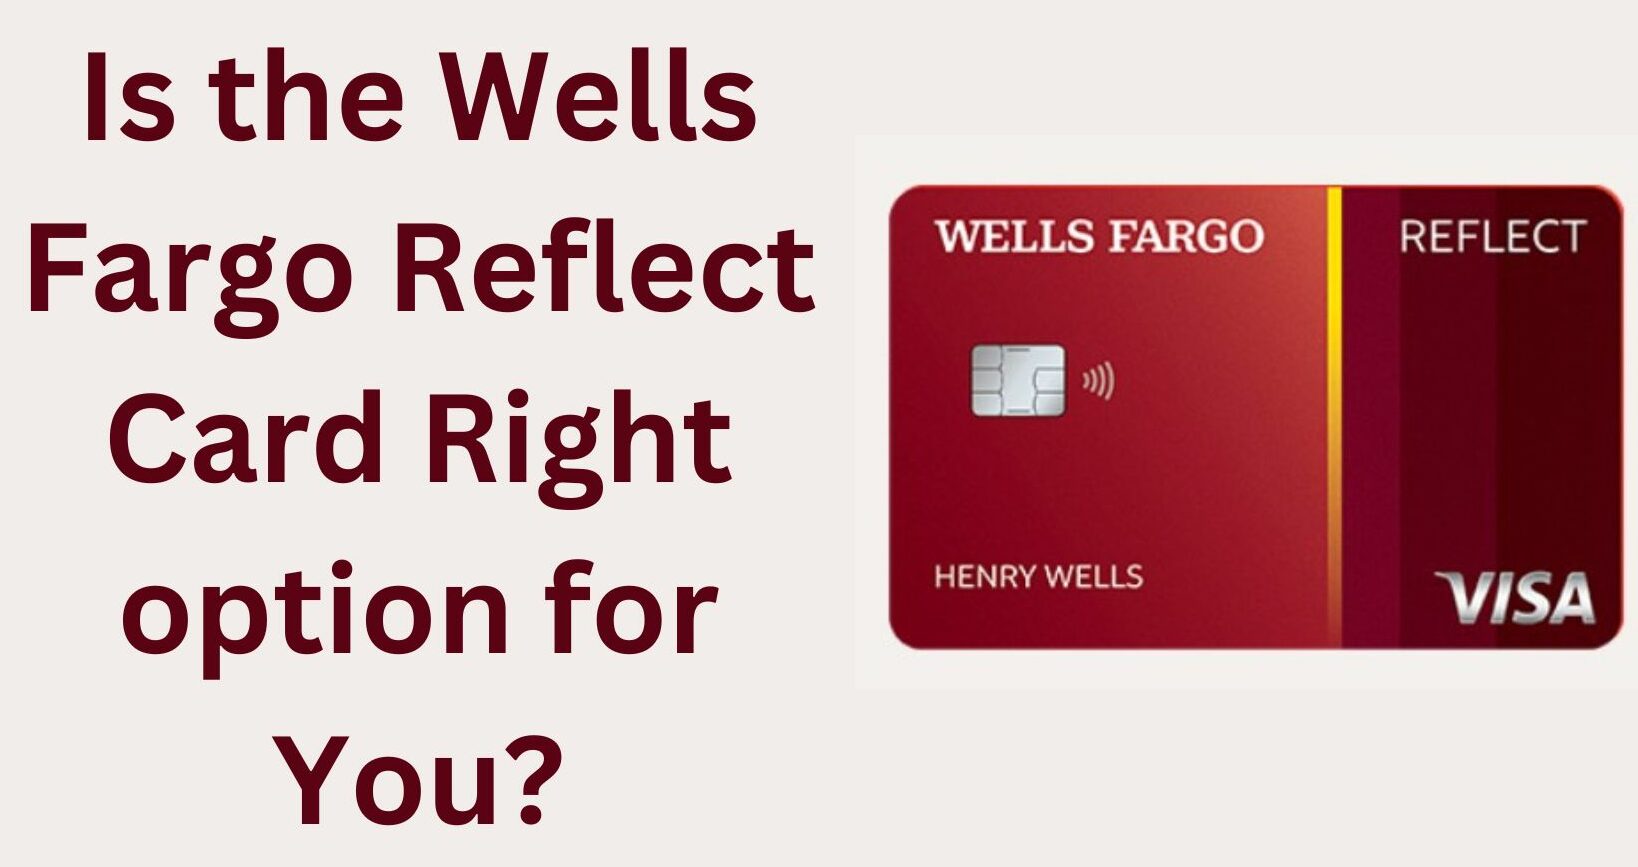 Is the Wells Fargo Reflect Card Right option for You